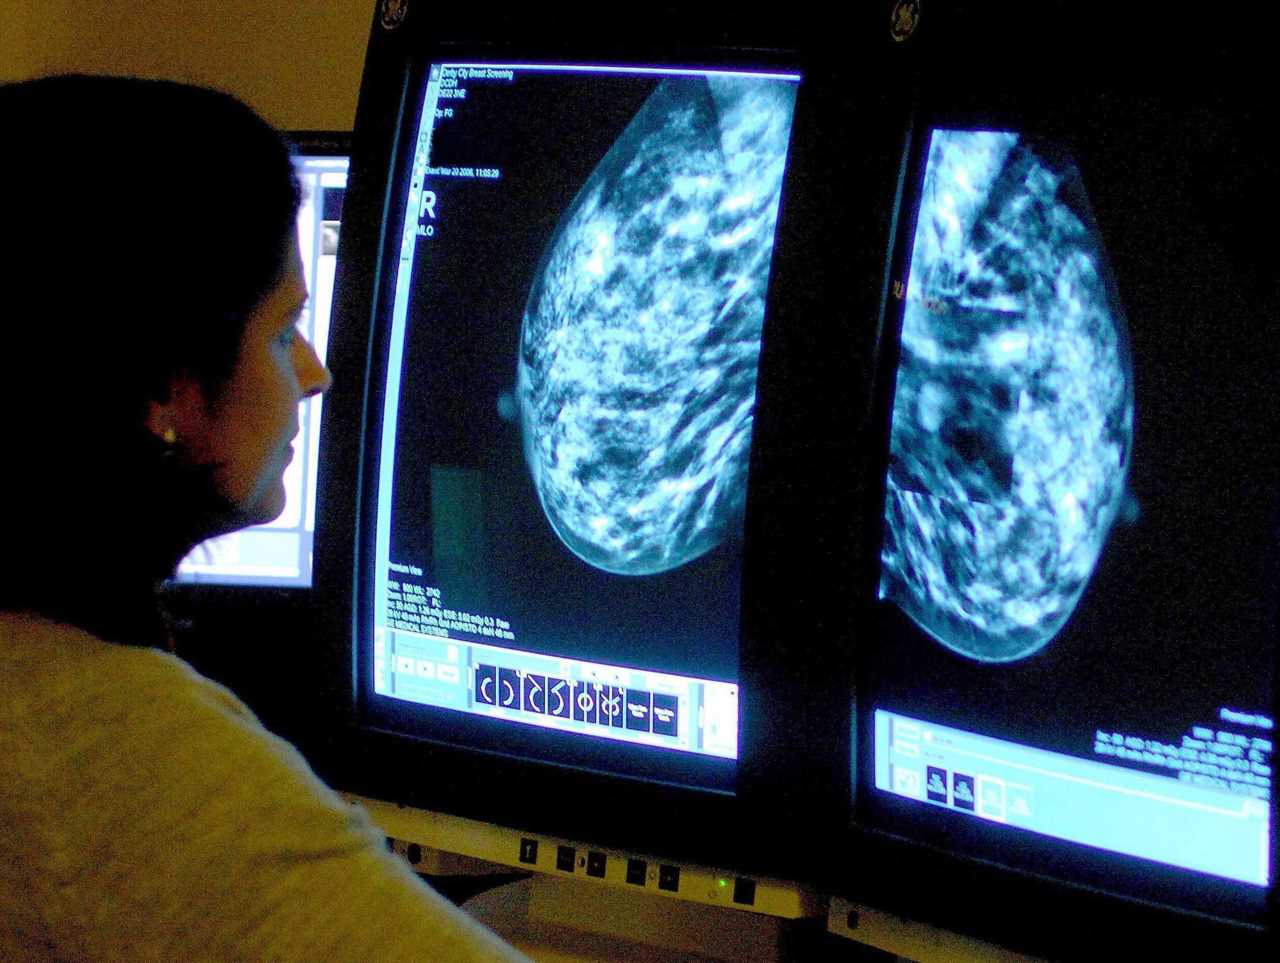 Thousands of Breast Cancer Cases Missed by NHS Screening, Campaigners Warn